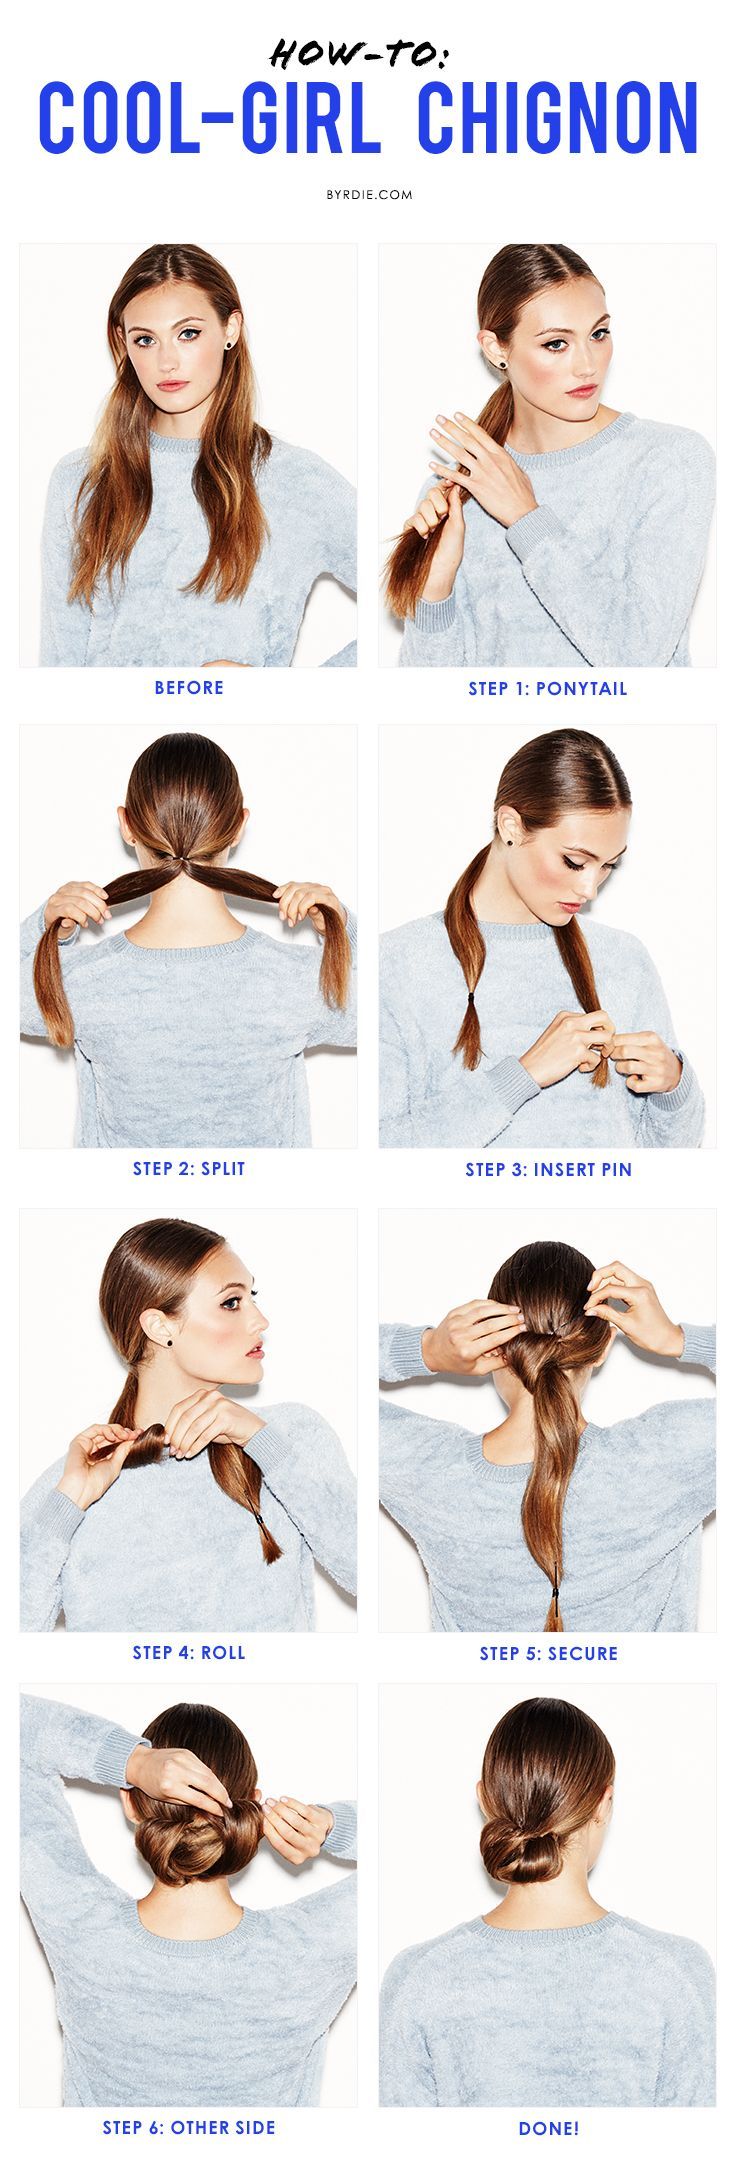 How to Master the Cool-Girl Version of a Low Bun